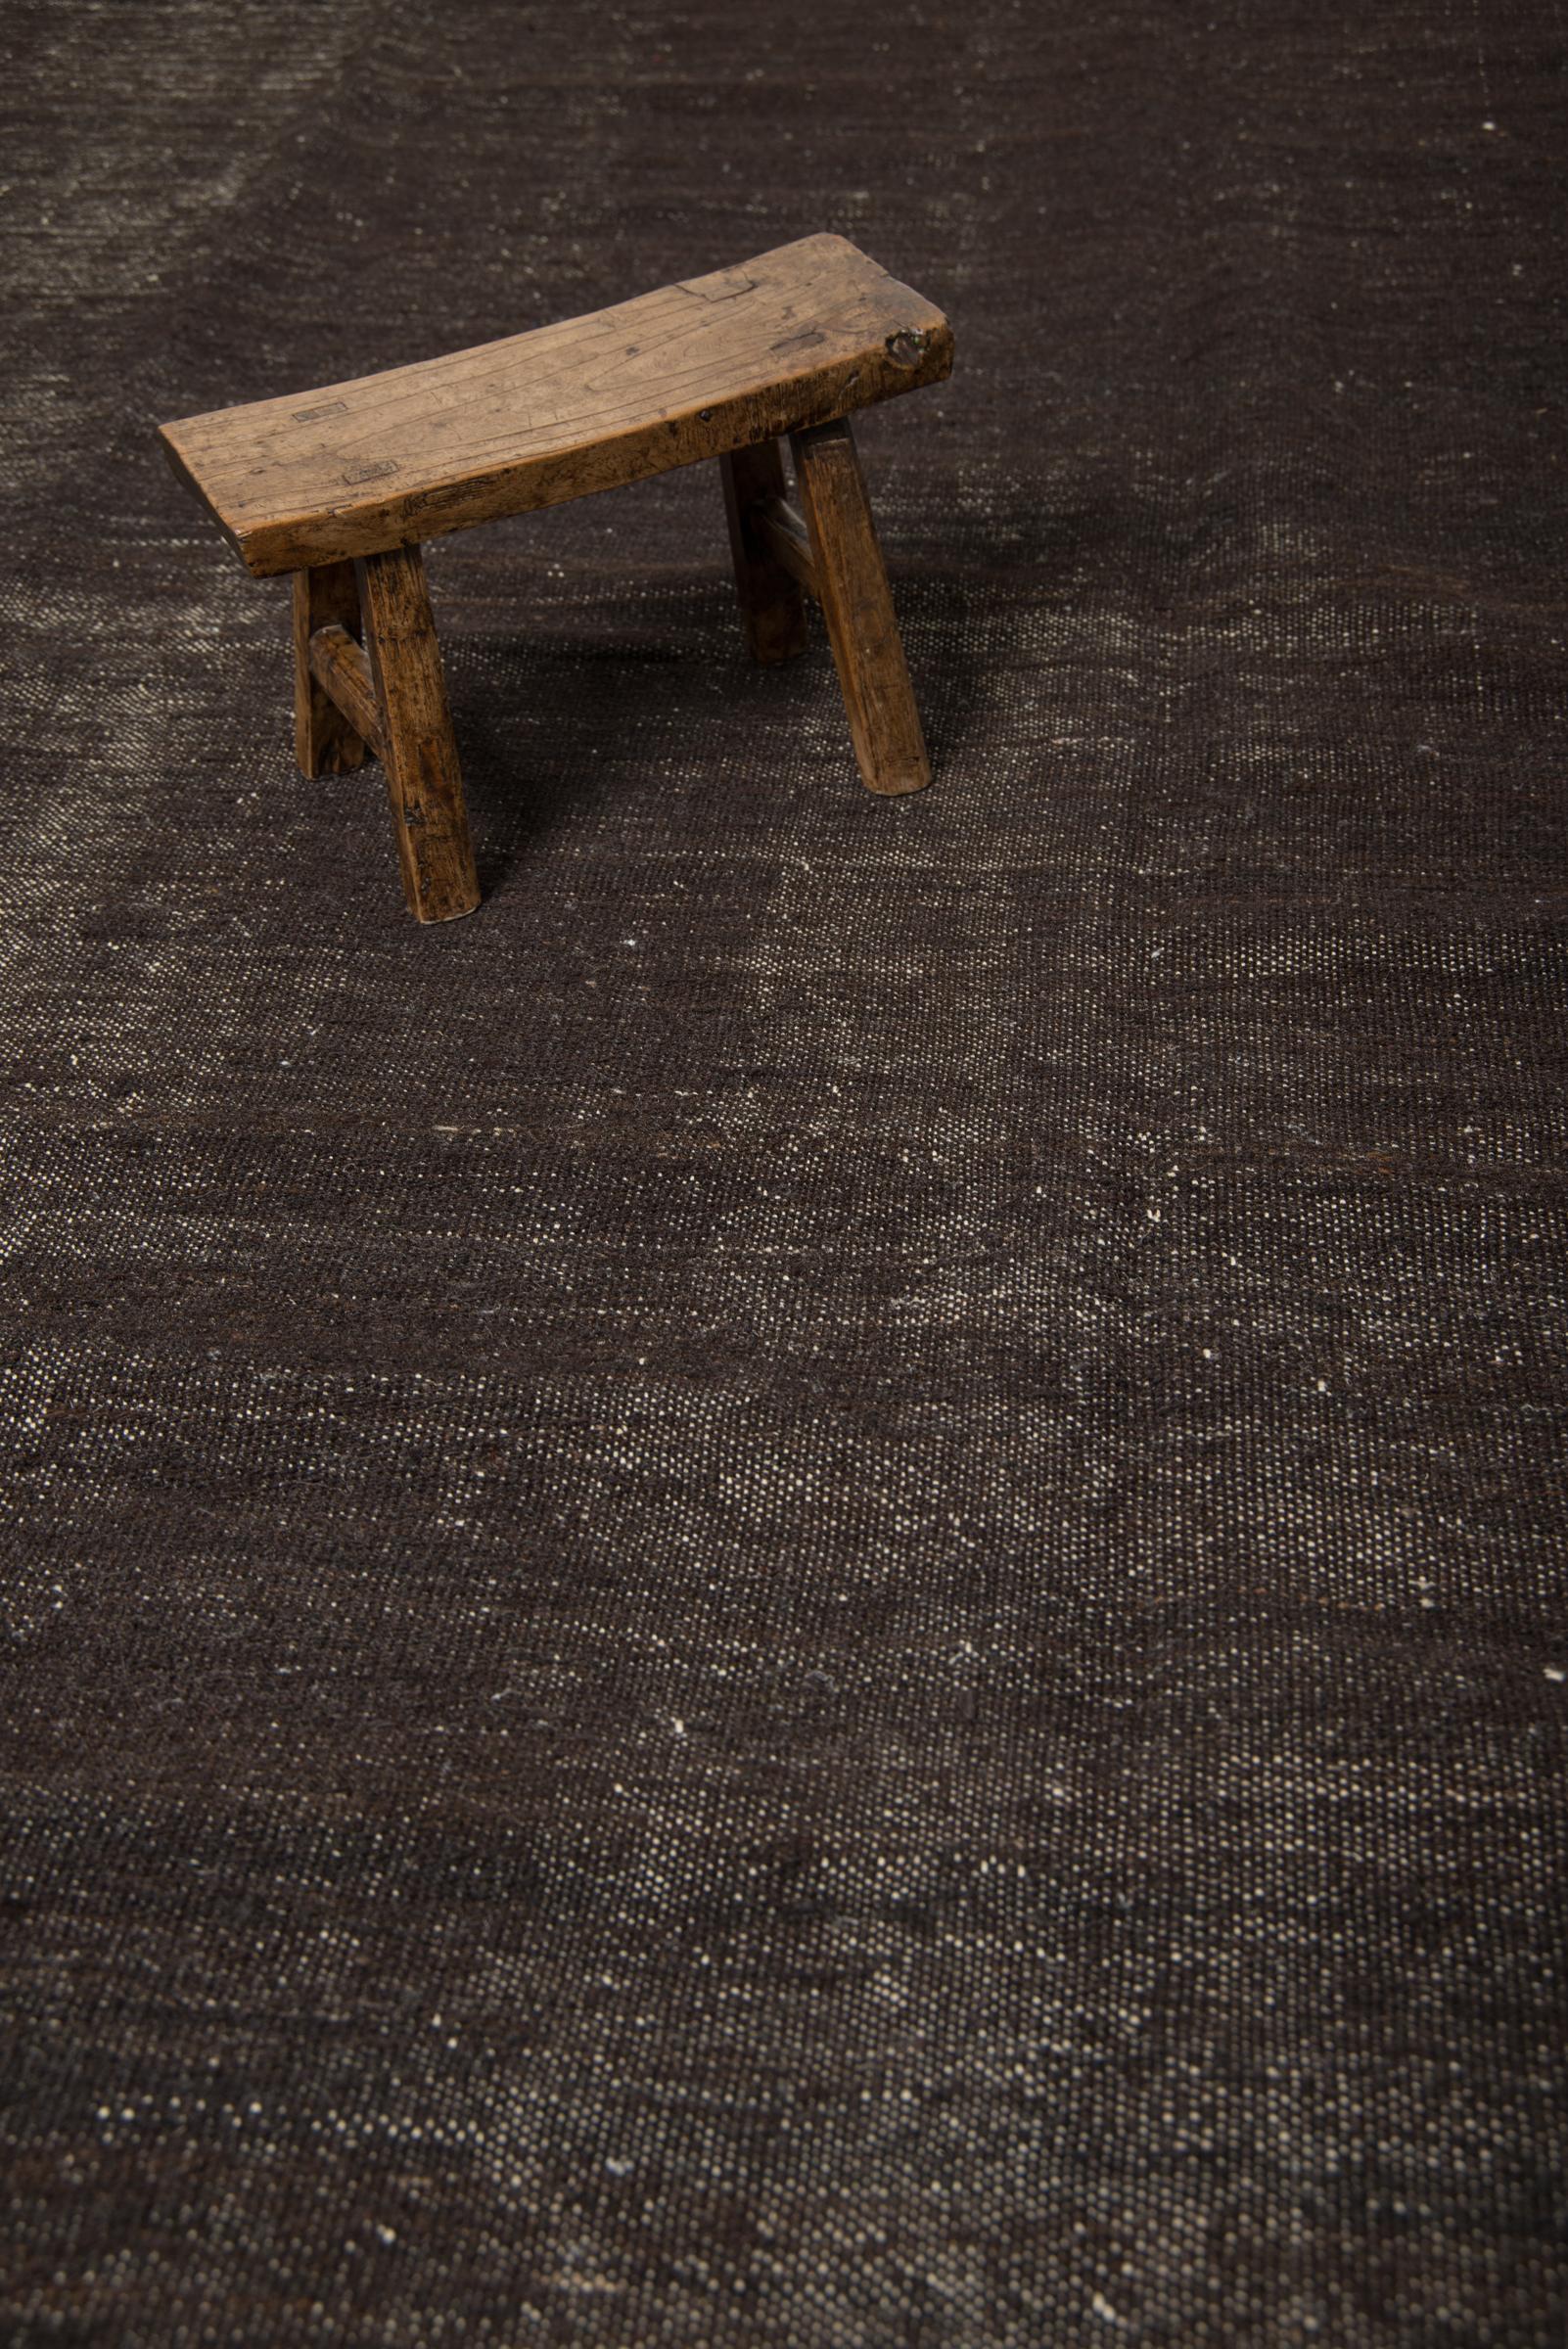 This vintage Kilim is simple in design yet so elegant with its deep dark brown an organic nature. This design captures both, elegance and raw beauty. Just unique and authentic. The most remarkable attribute about these types of Kilim is its own